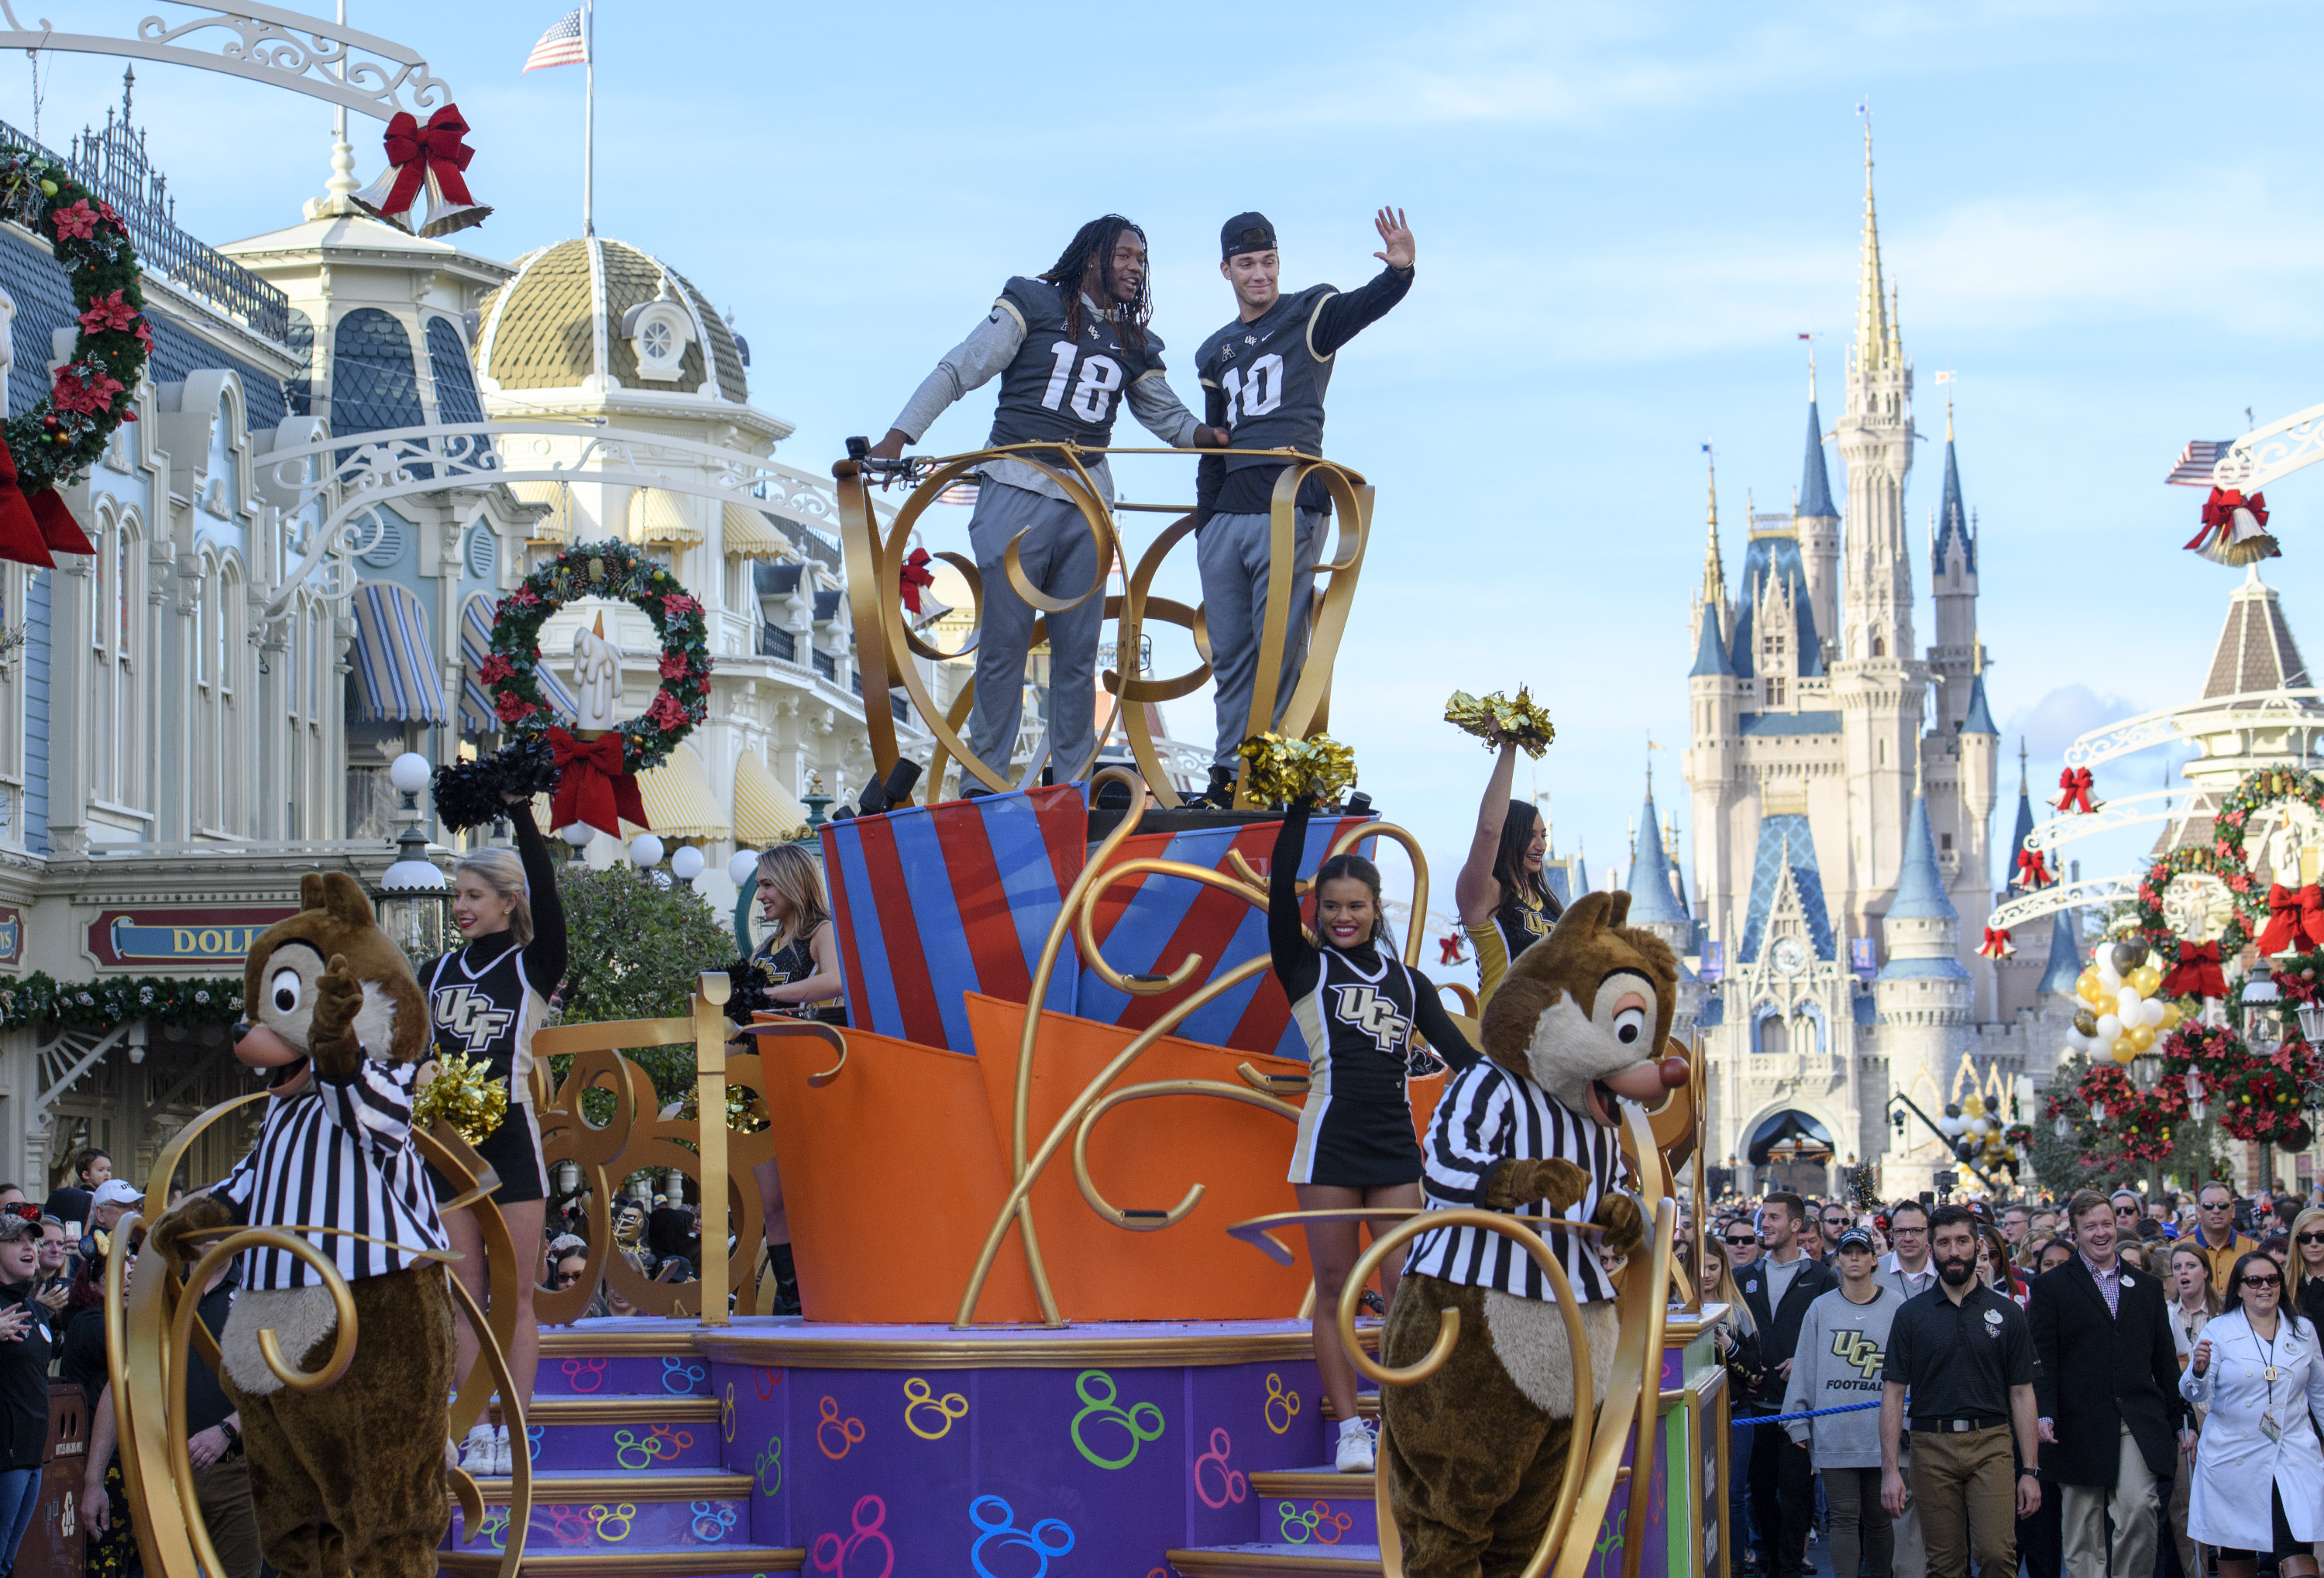 Houston Astros honored with parade at Walt Disney World - ABC13